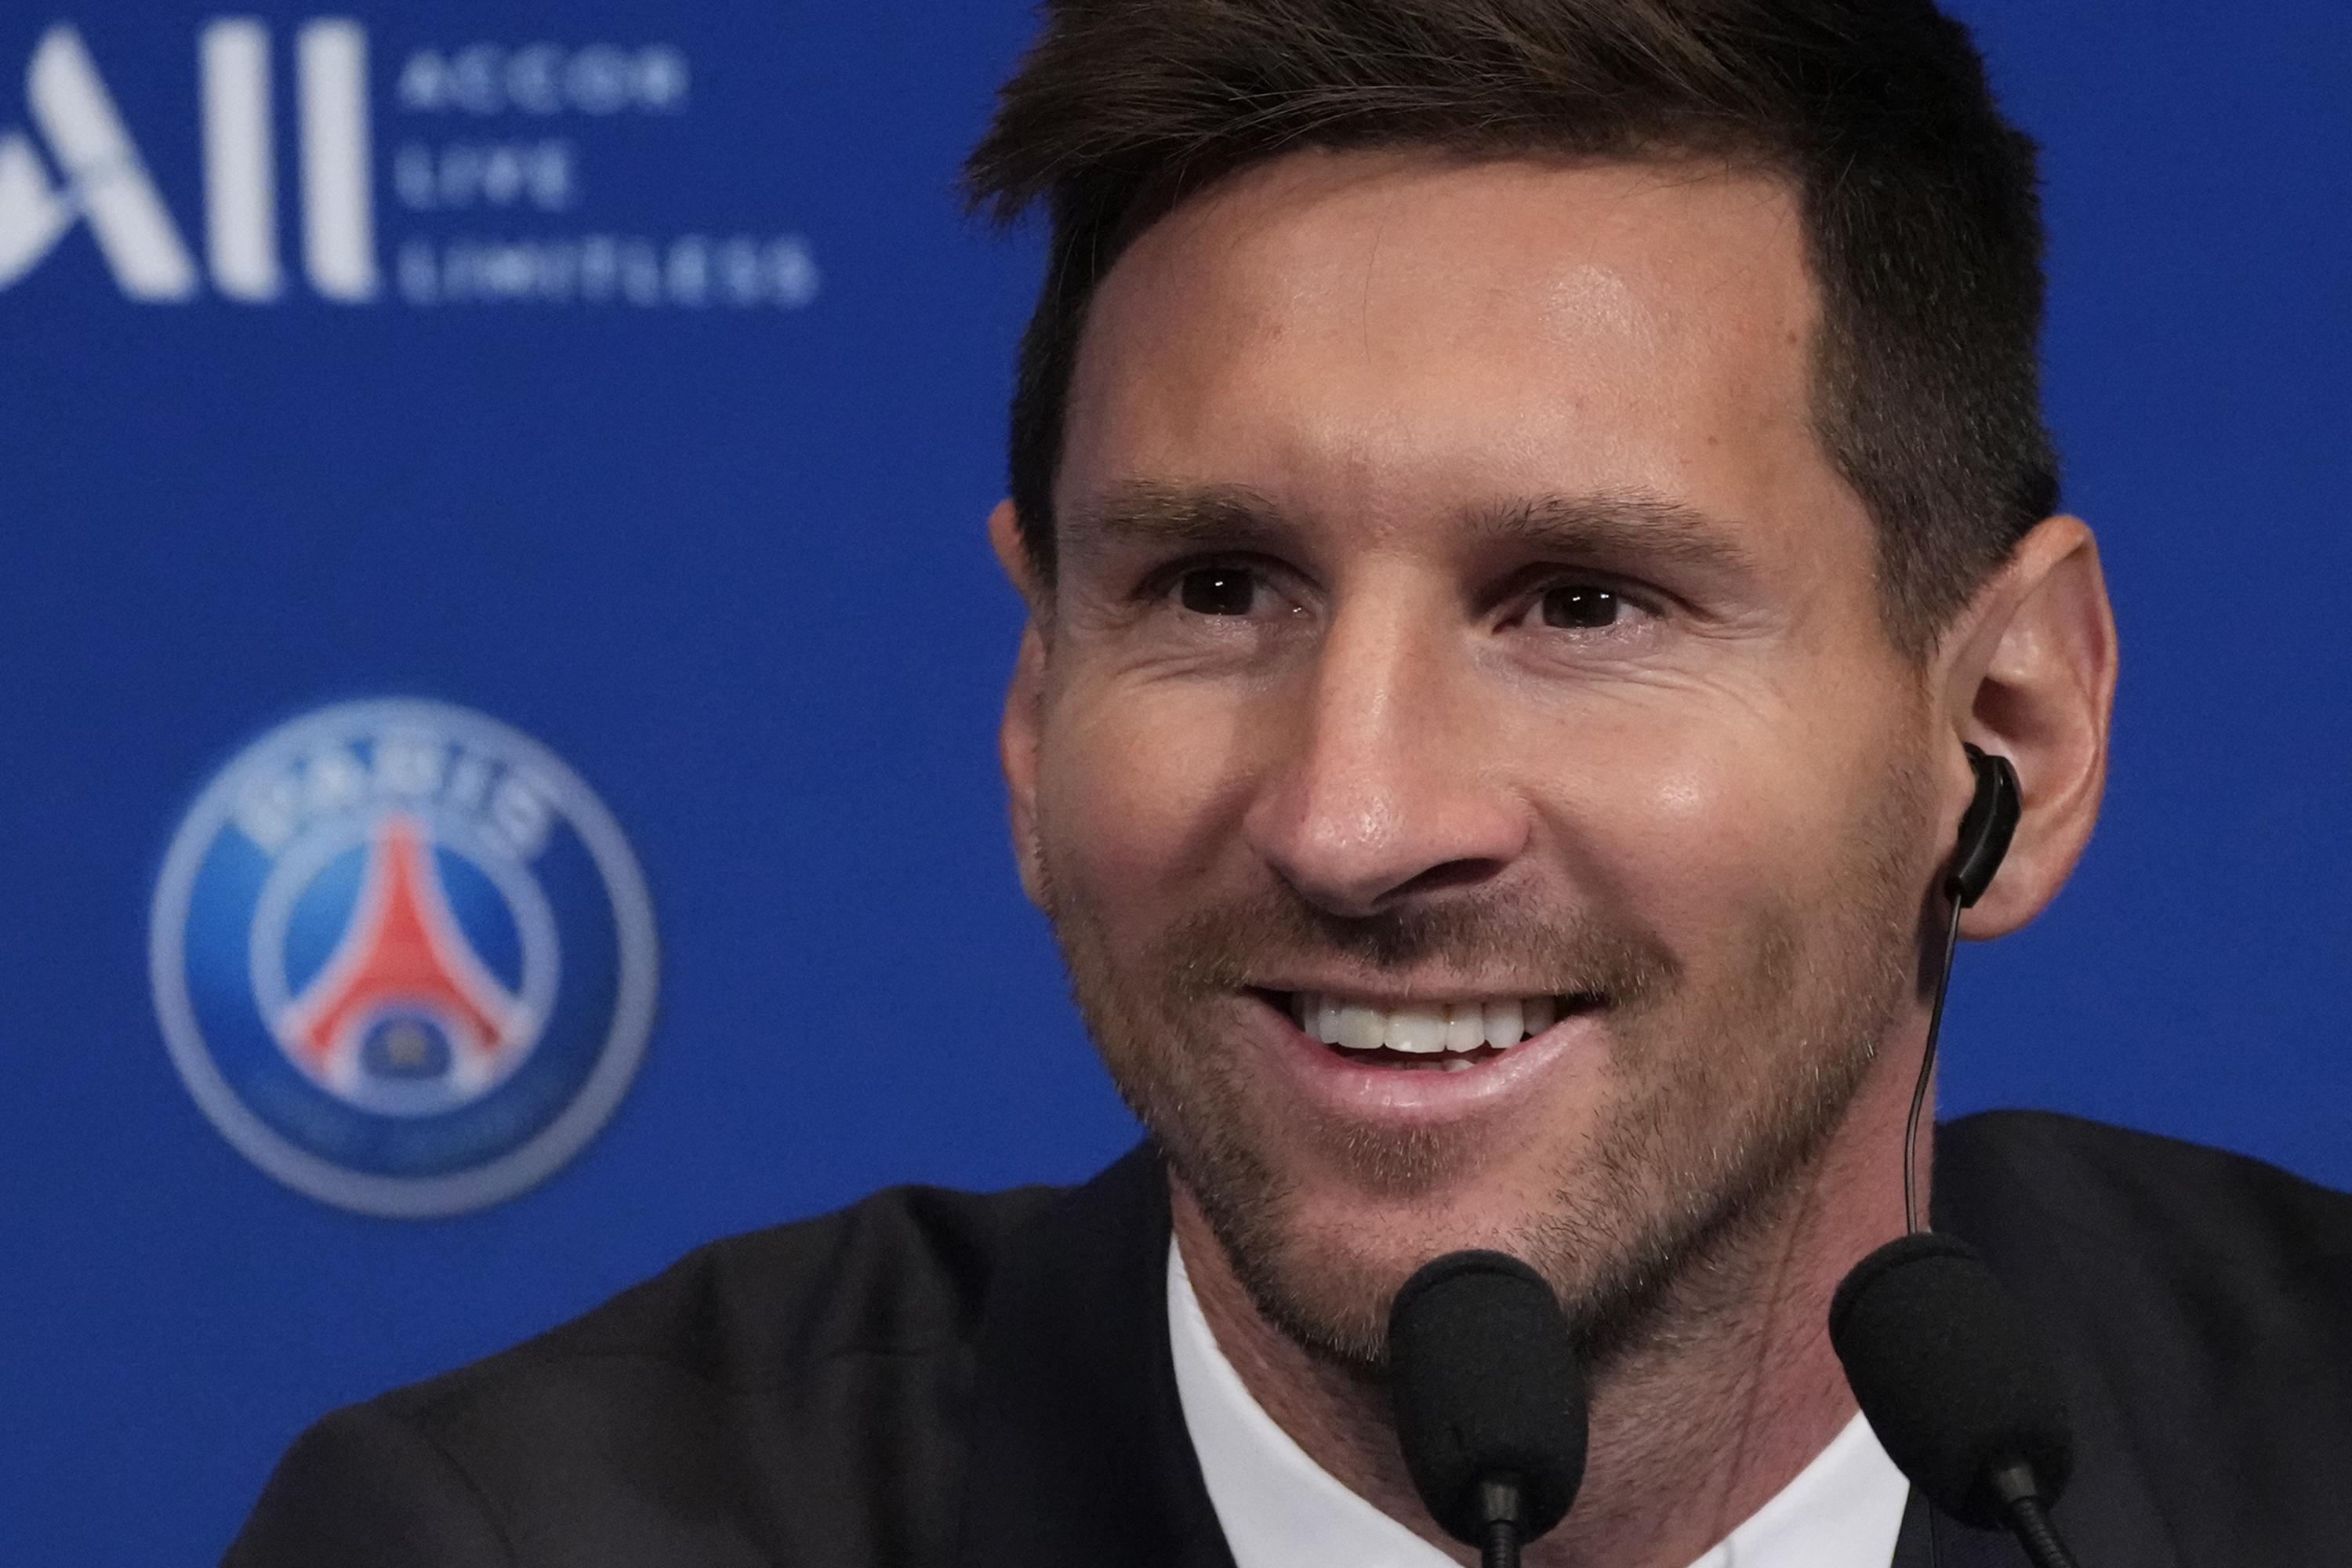 Lionel Messi eyes Champions League trophy with PSG | AP News